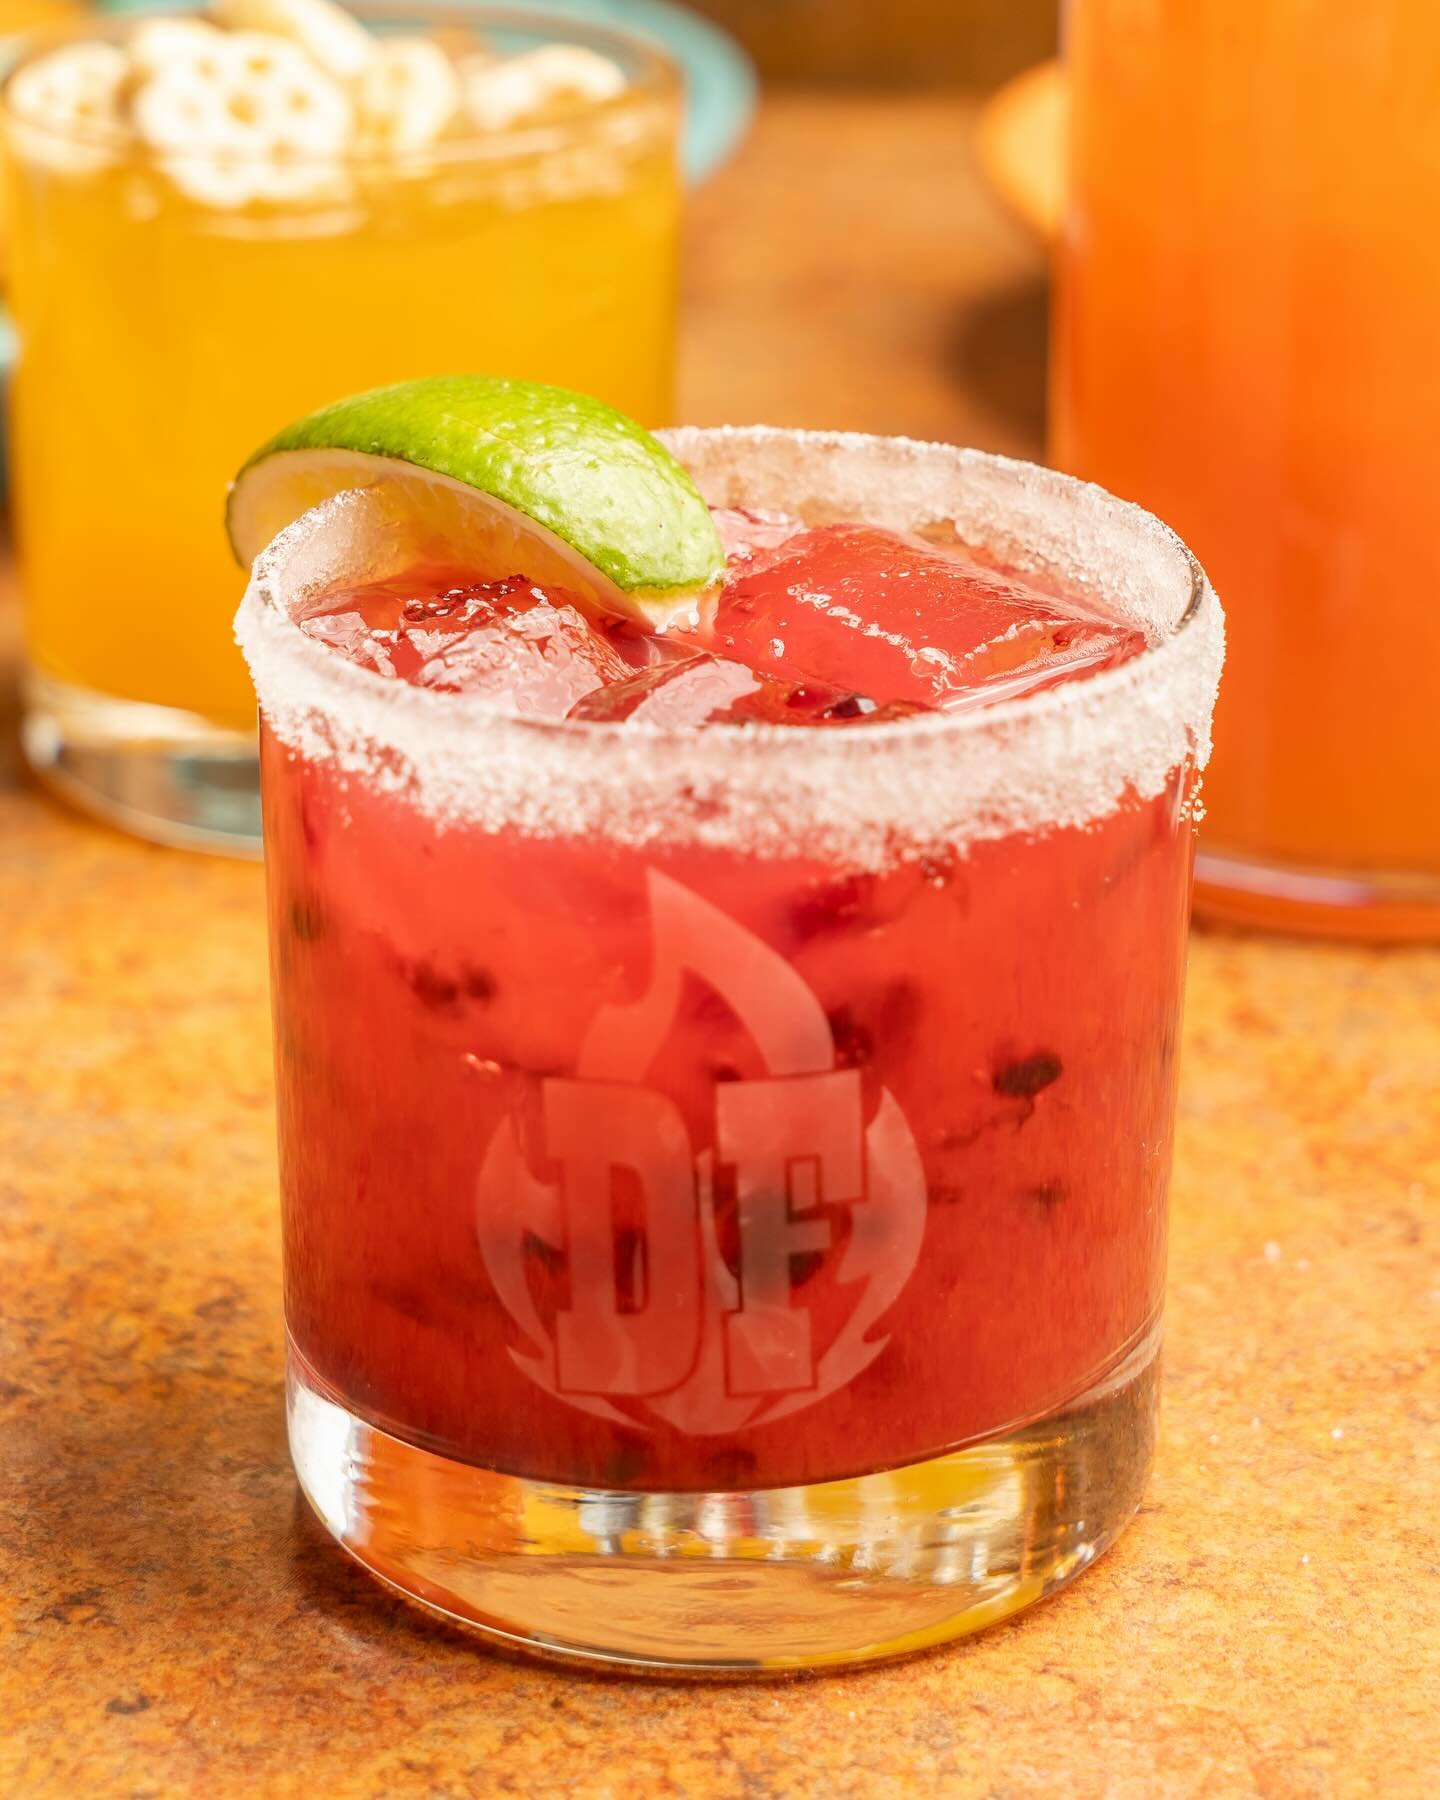 Cheers to this beautiful 70 degree spring day on Long Island ☀️🕶️🍹

#cheers #spring #sun #cocktails #margarita #delfuego #longisland #babylon #stjames #patchogue #eastnorthport #yelp #foodies #eeeeeats